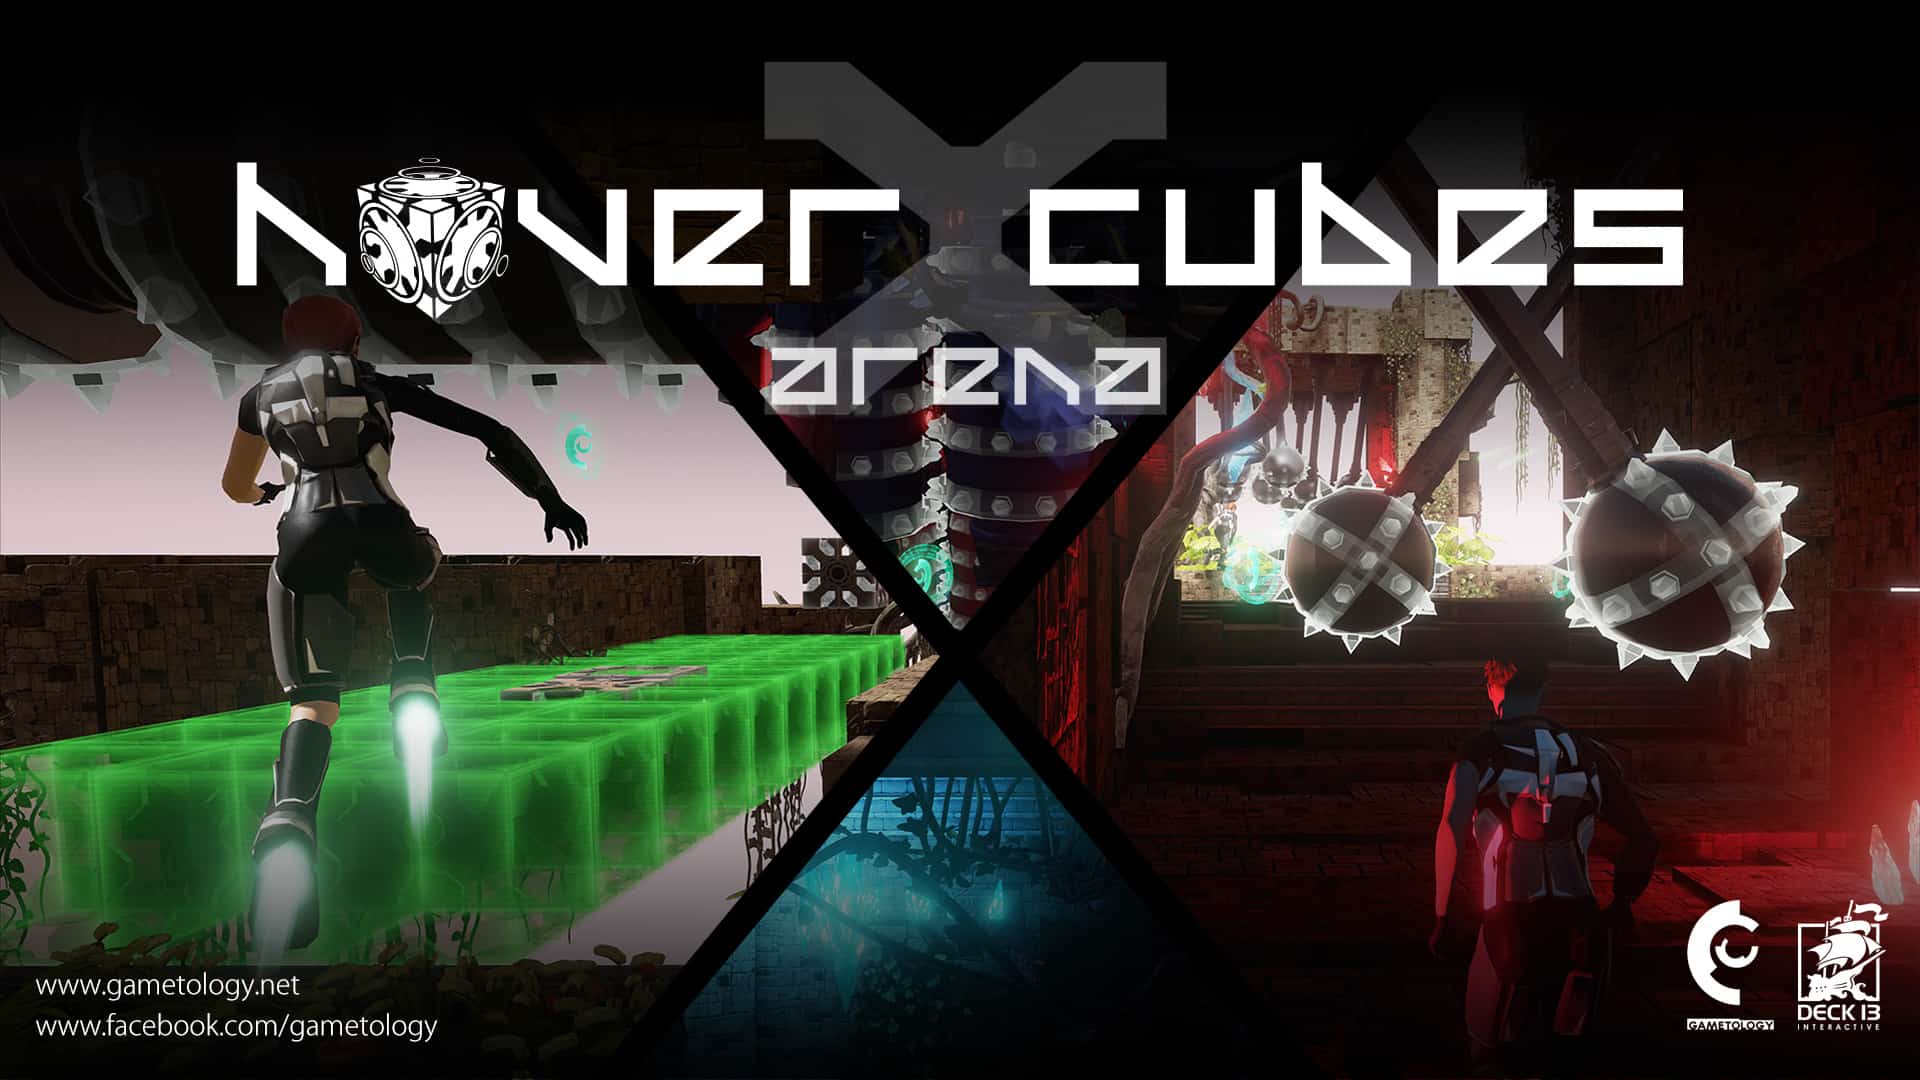 Hover Cubes: Arena